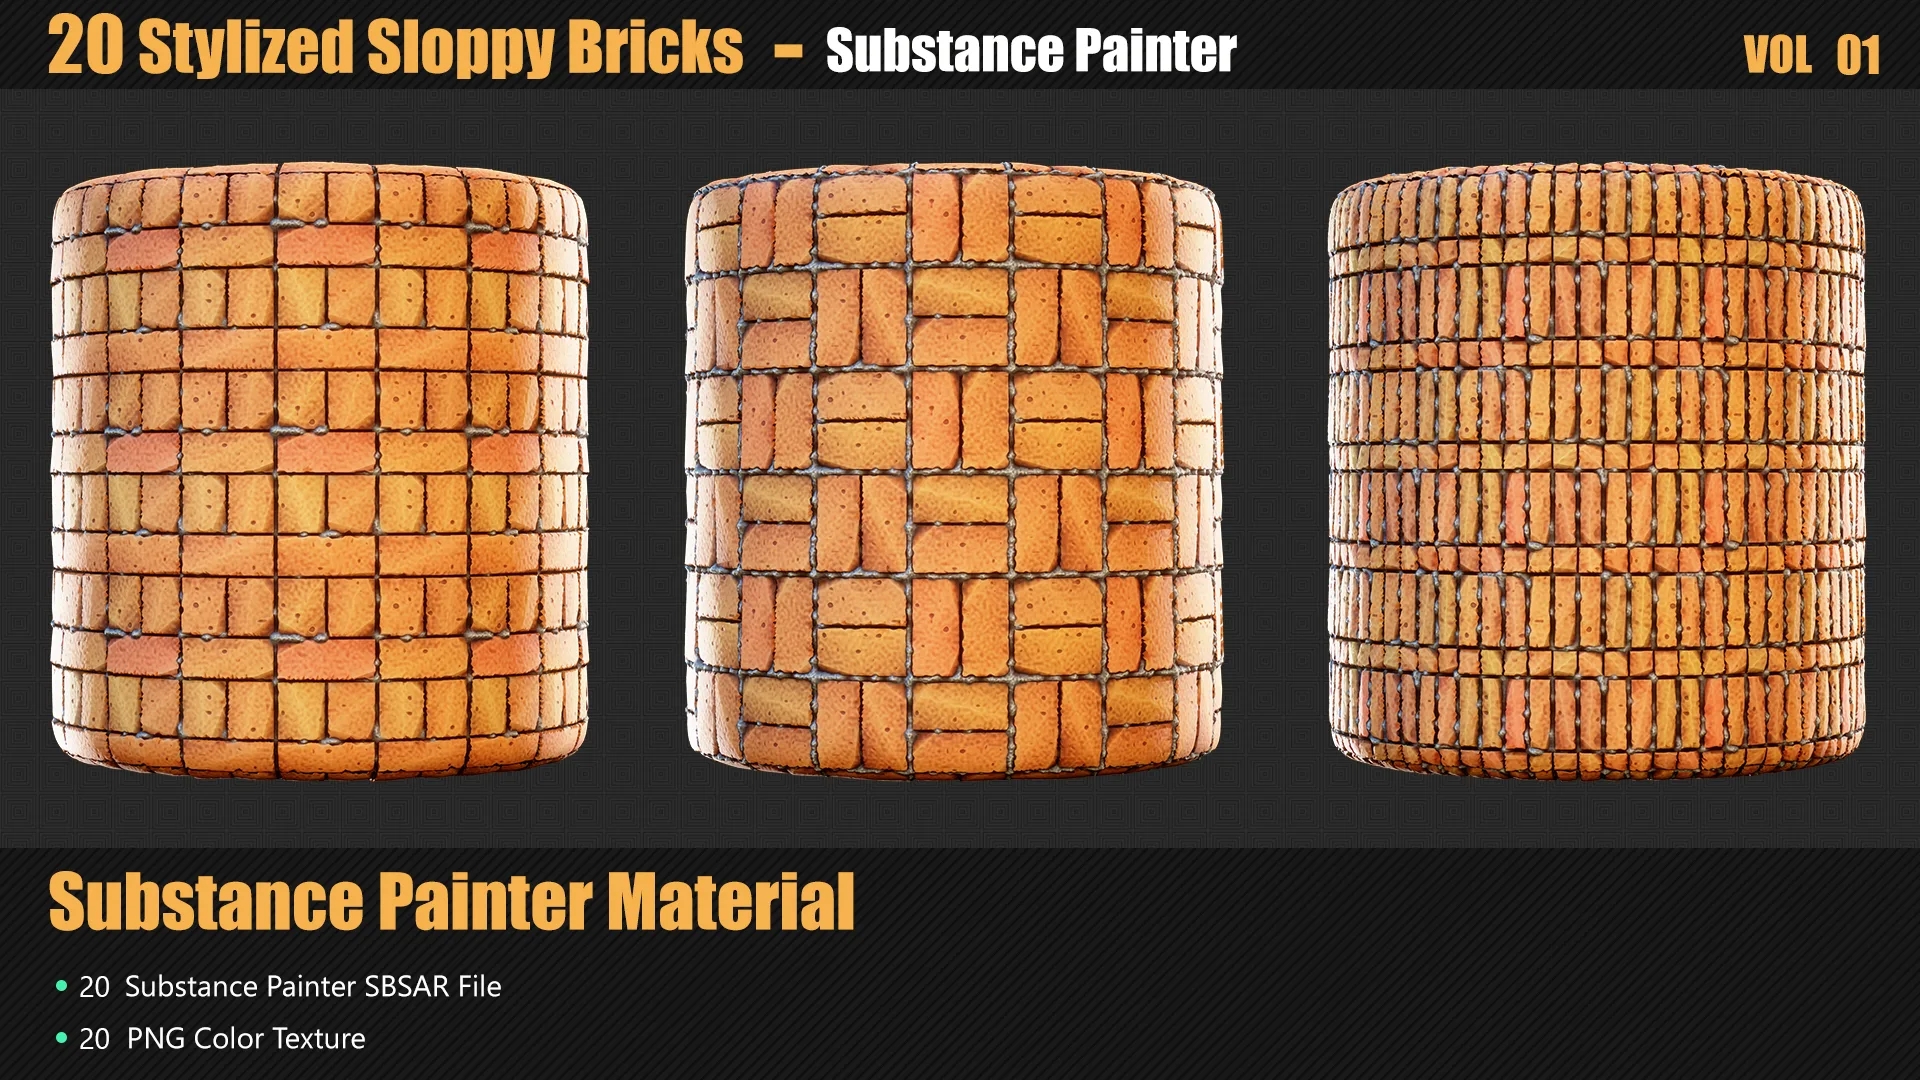 20 Stylized Sloppy Bricks Materials In Substance Painter